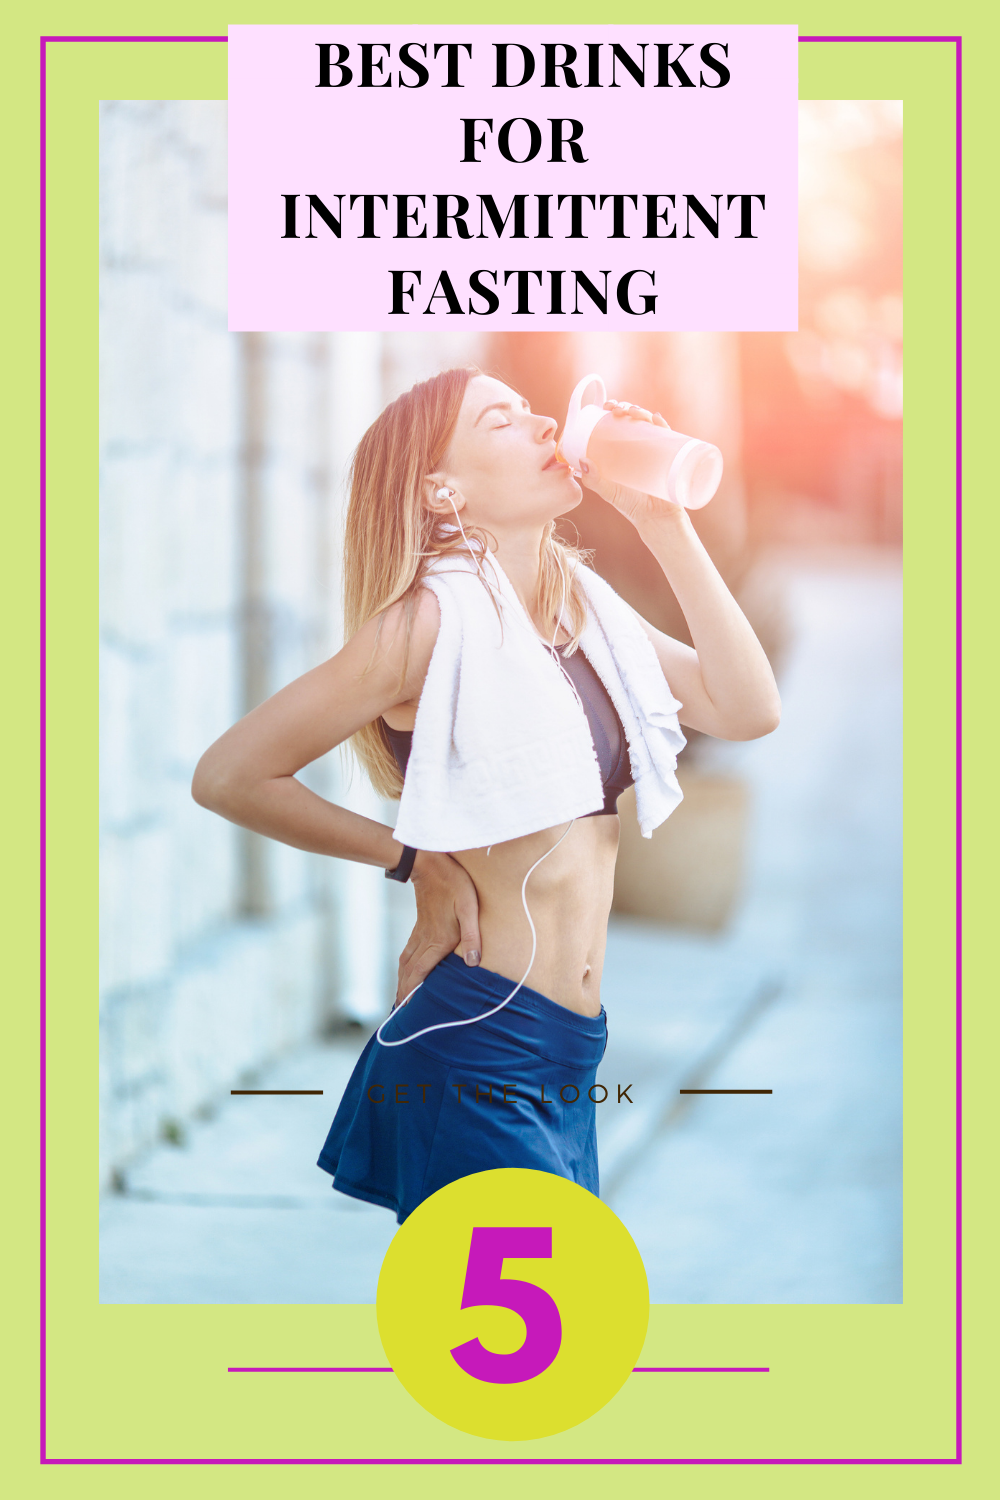 What To Drink While Fasting